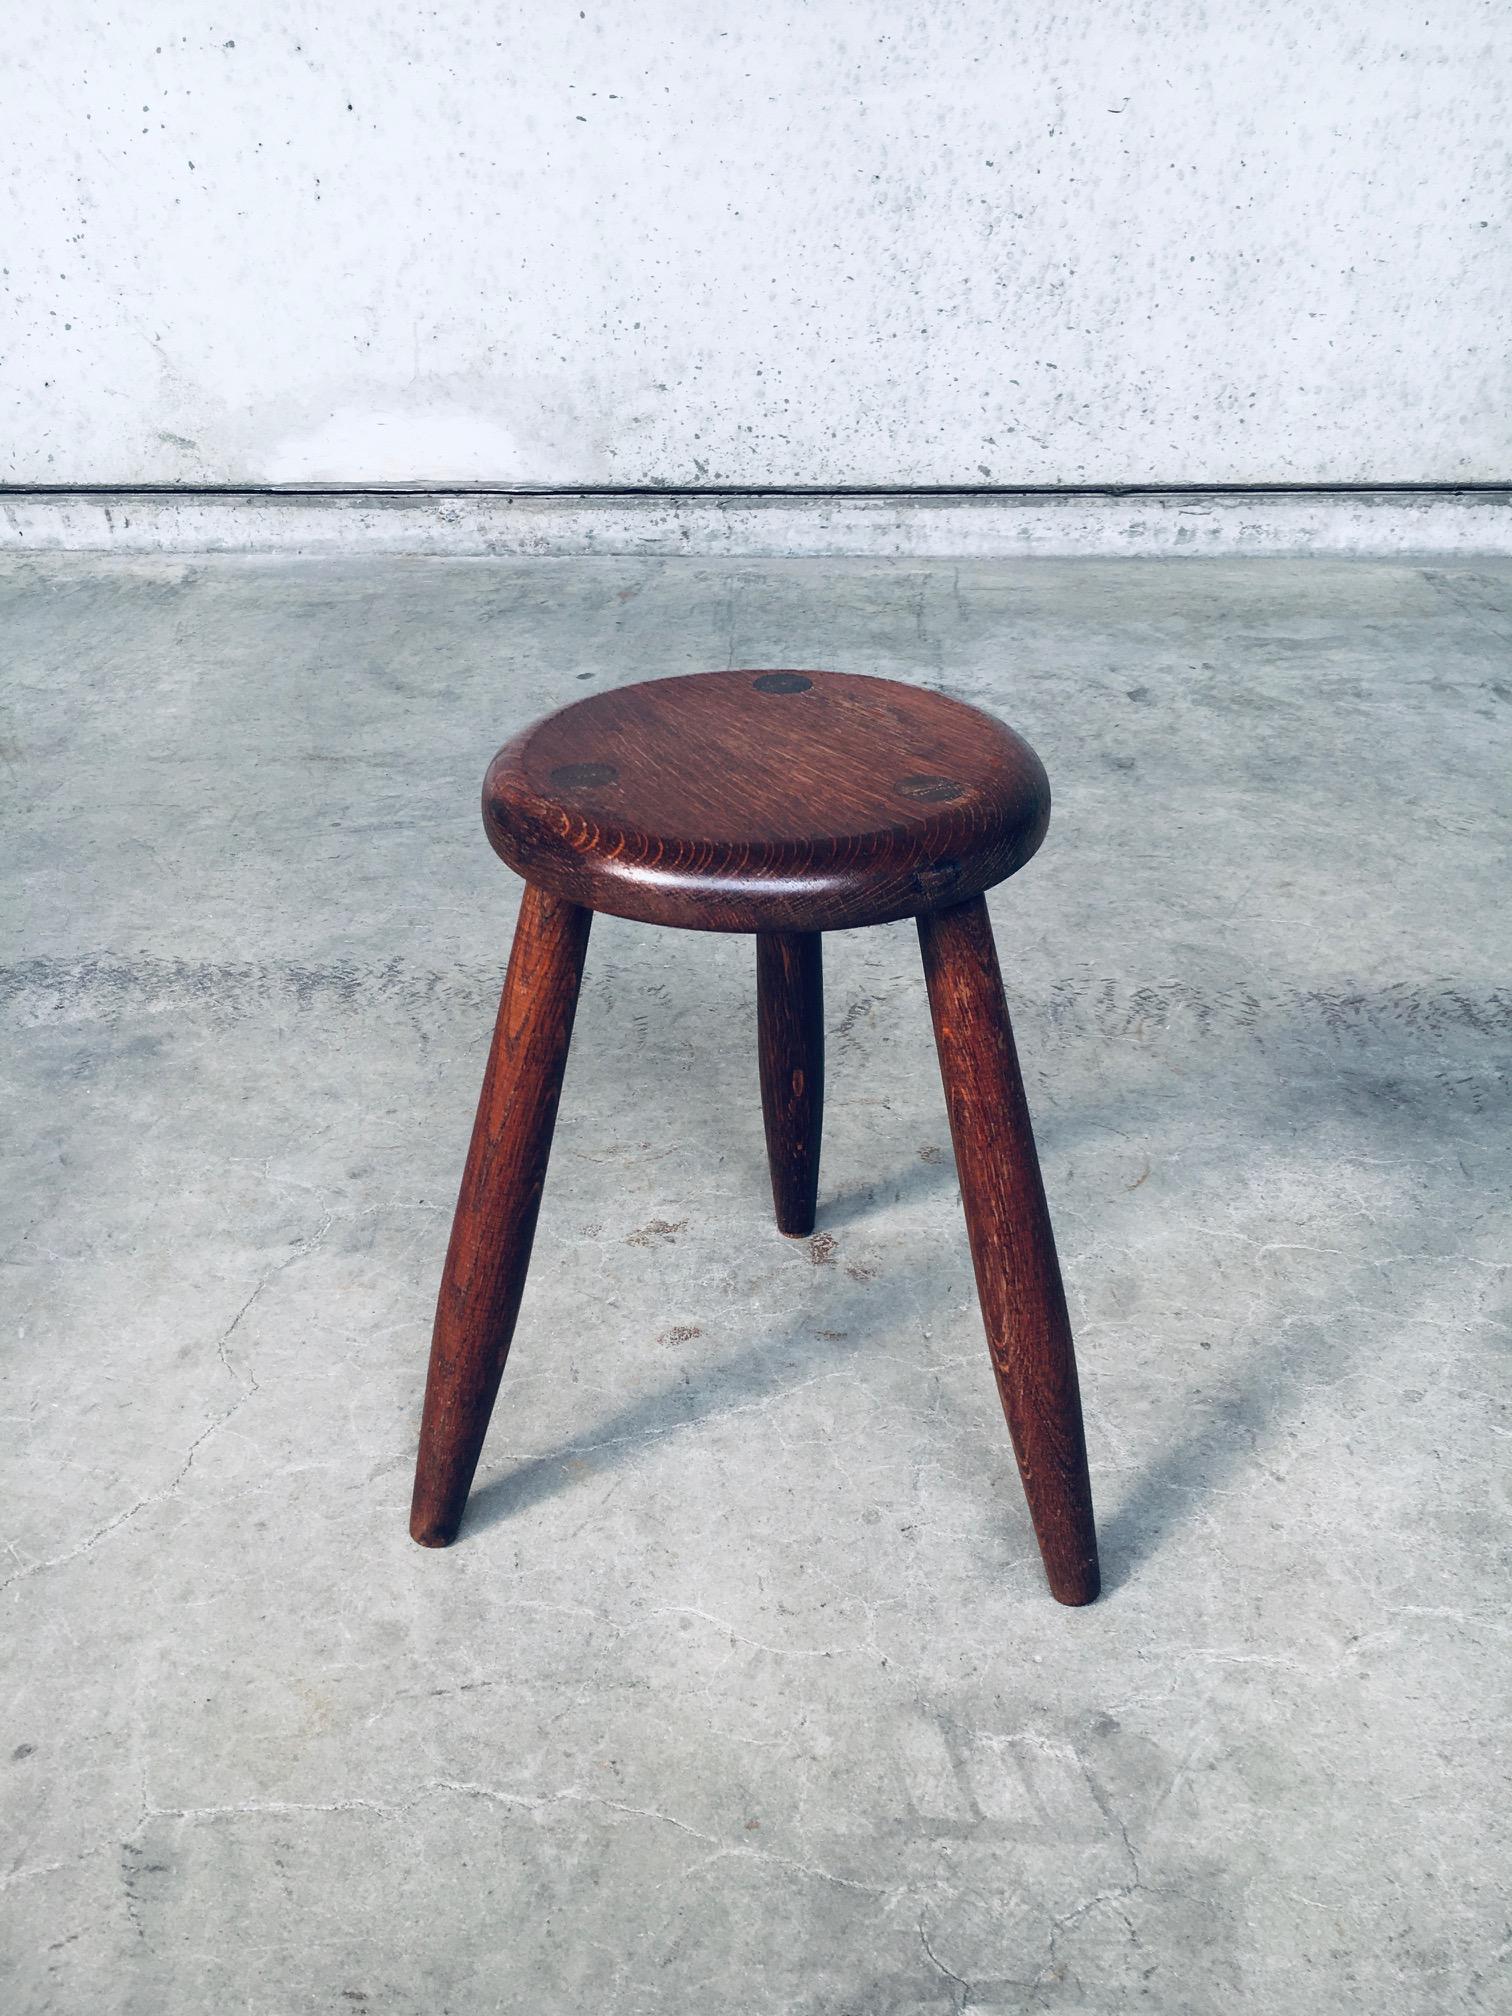 Vintage Artisan Hand Made Turned Oak Tripod Stool. Made in Belgium, 1940's period. Solid oak wood turned stool on three legs. Very well made with nice proportions. In very good, all original condition. Measures 42,5cm x 38cm x 38cm.